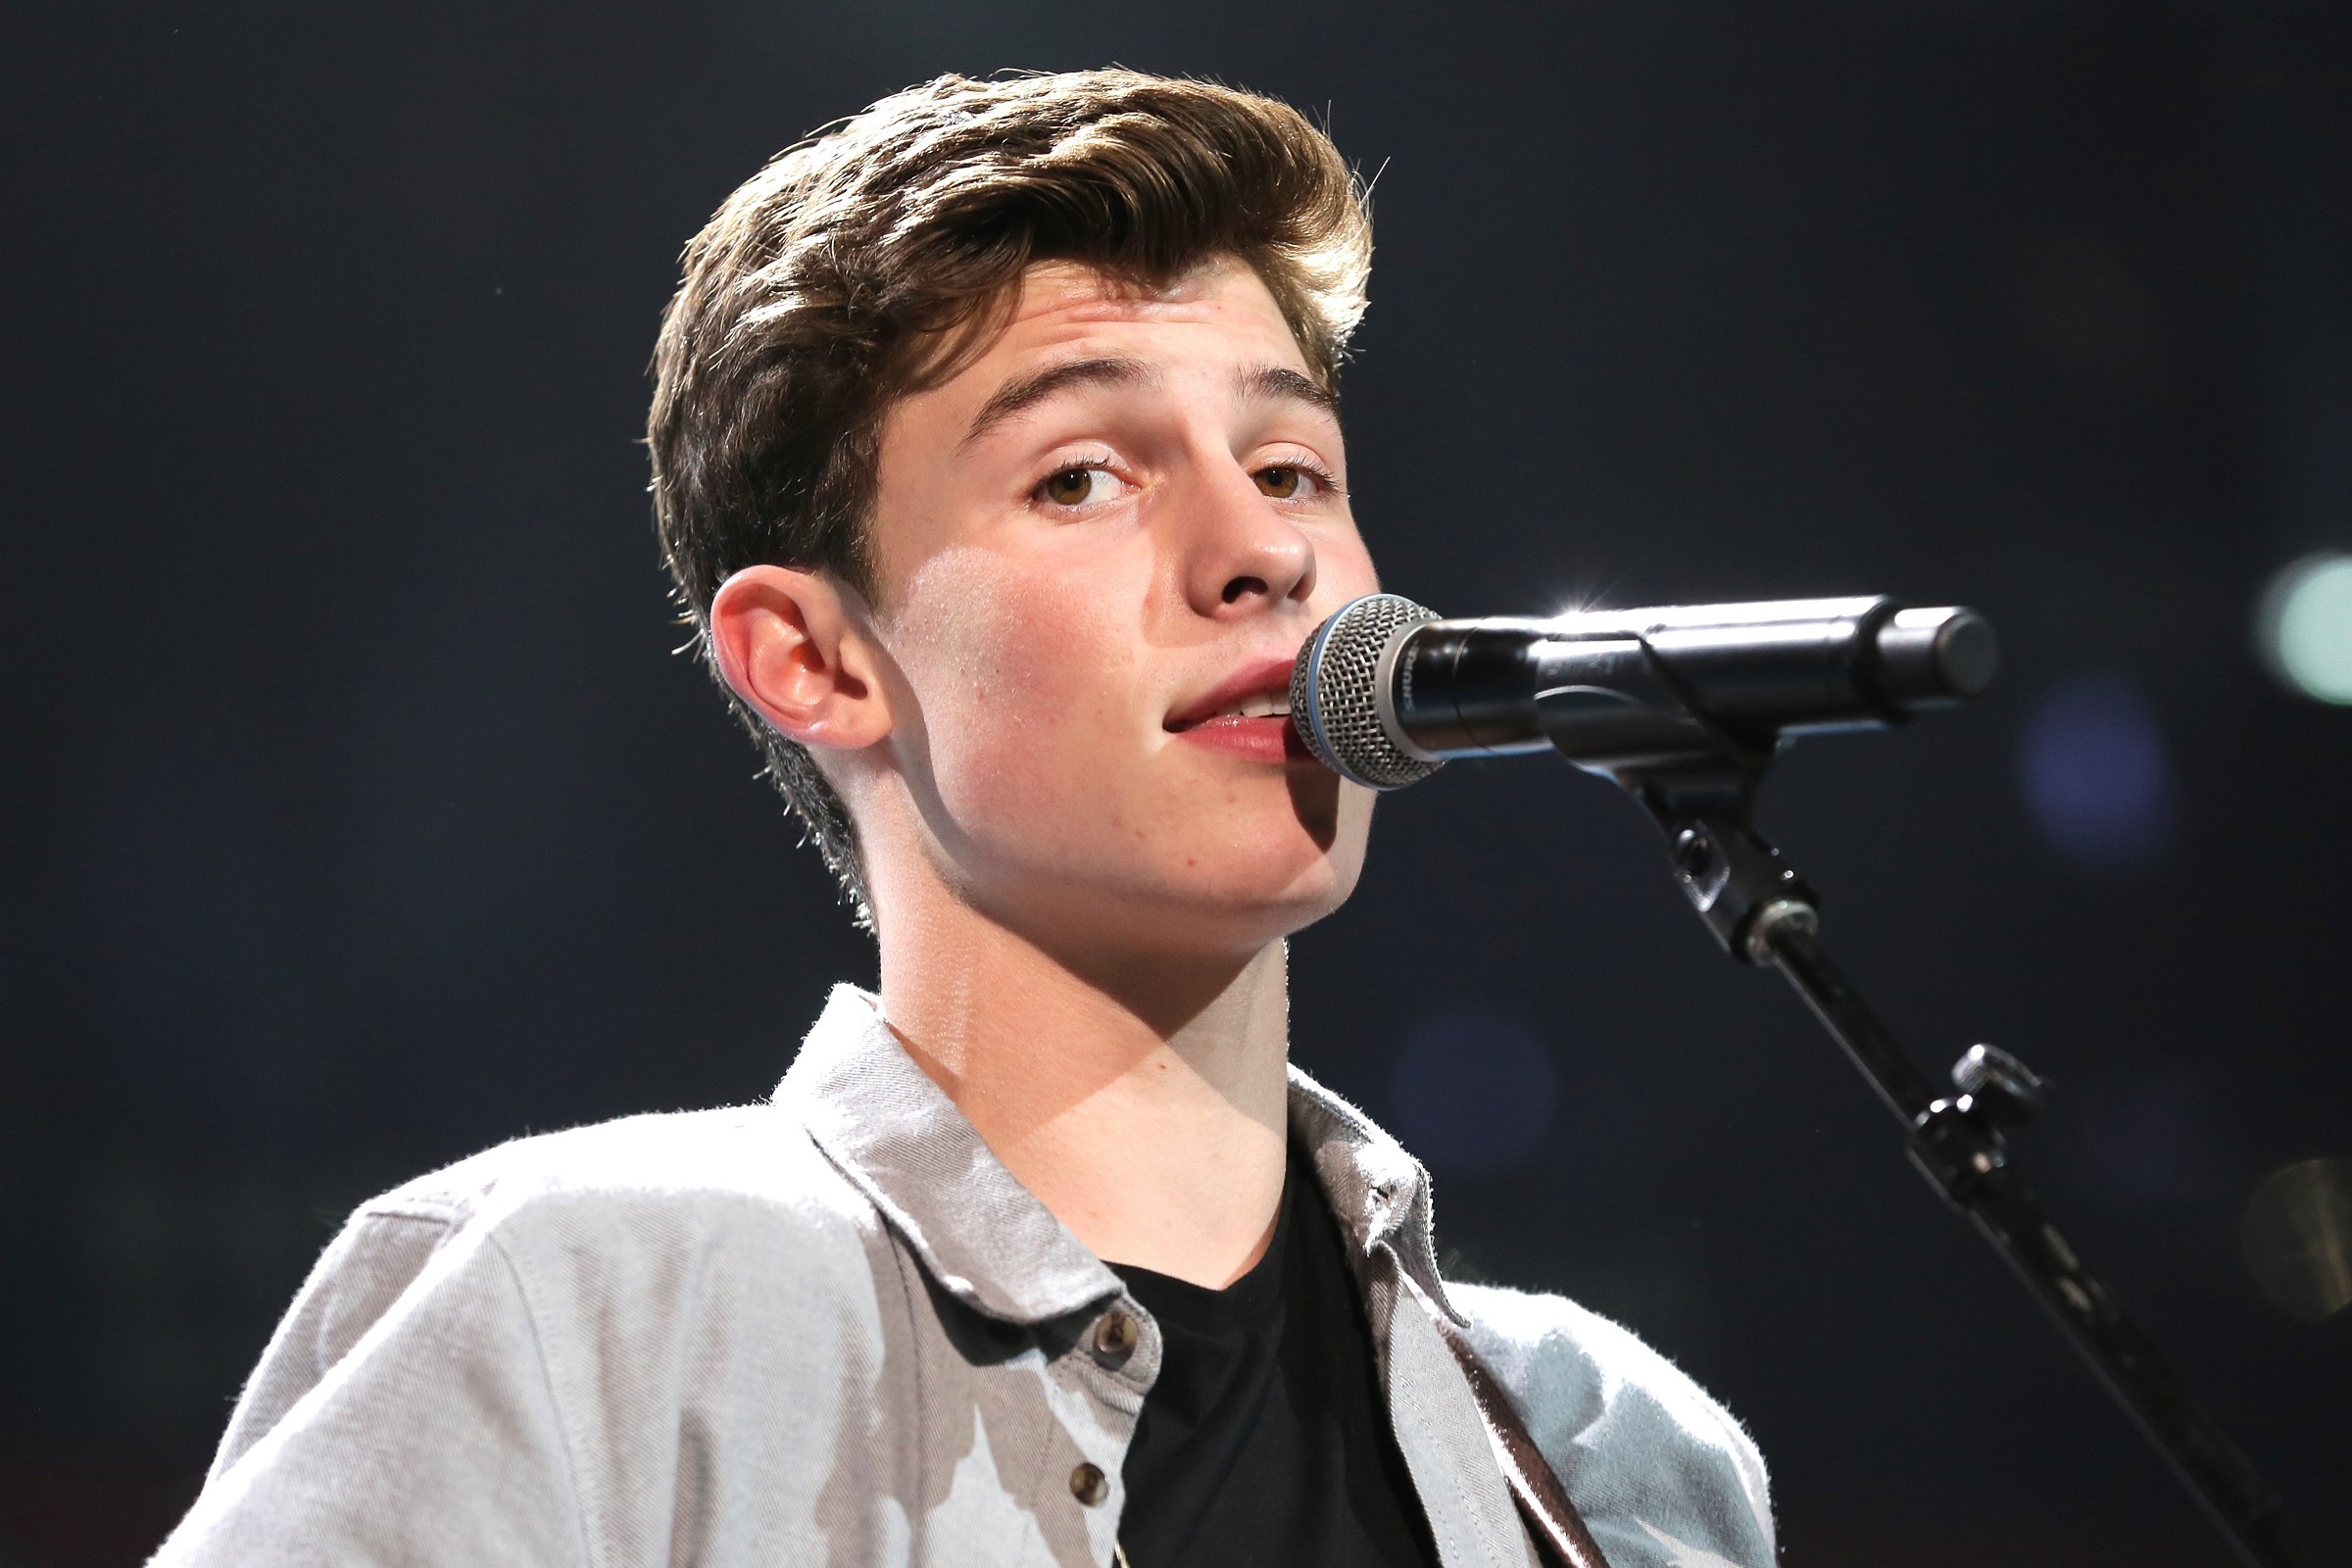 Shawn Mendes Wallpapers Images Photos Pictures Backgrounds